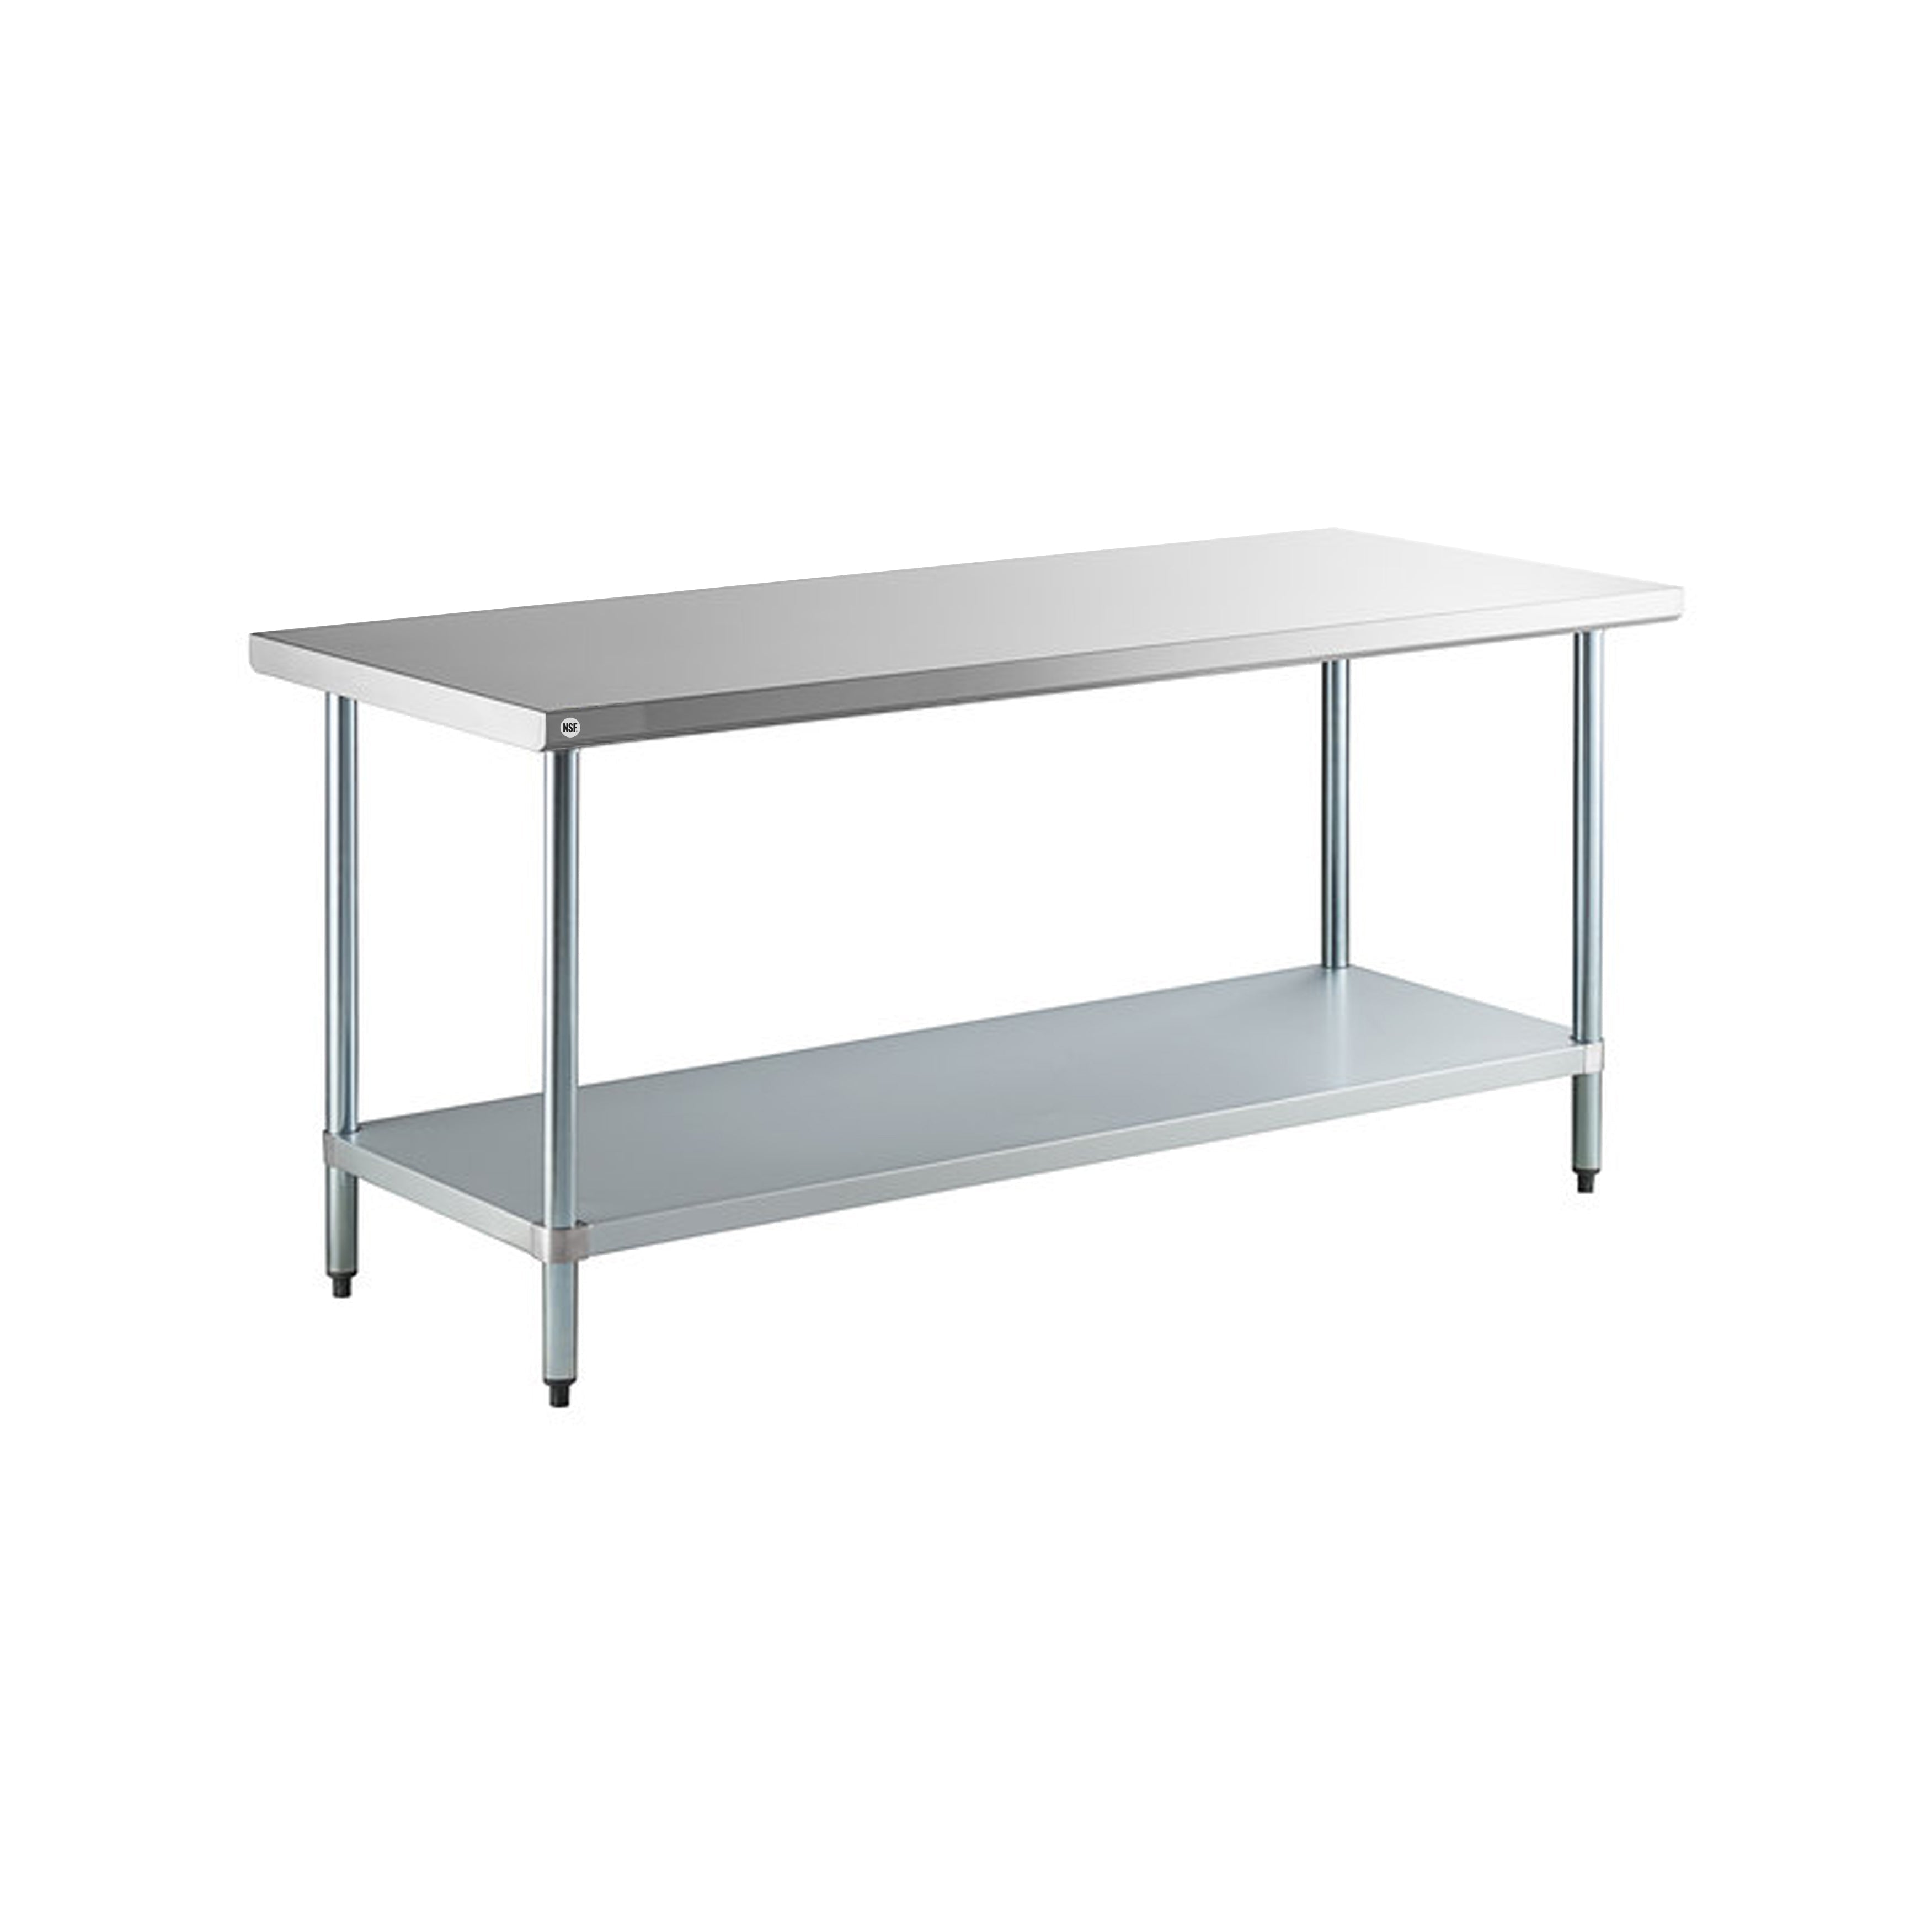 Omcan - 22075, Commercial 30" x 72" Stainless Steel Kitchen Work Table 1300lbs Light Duty